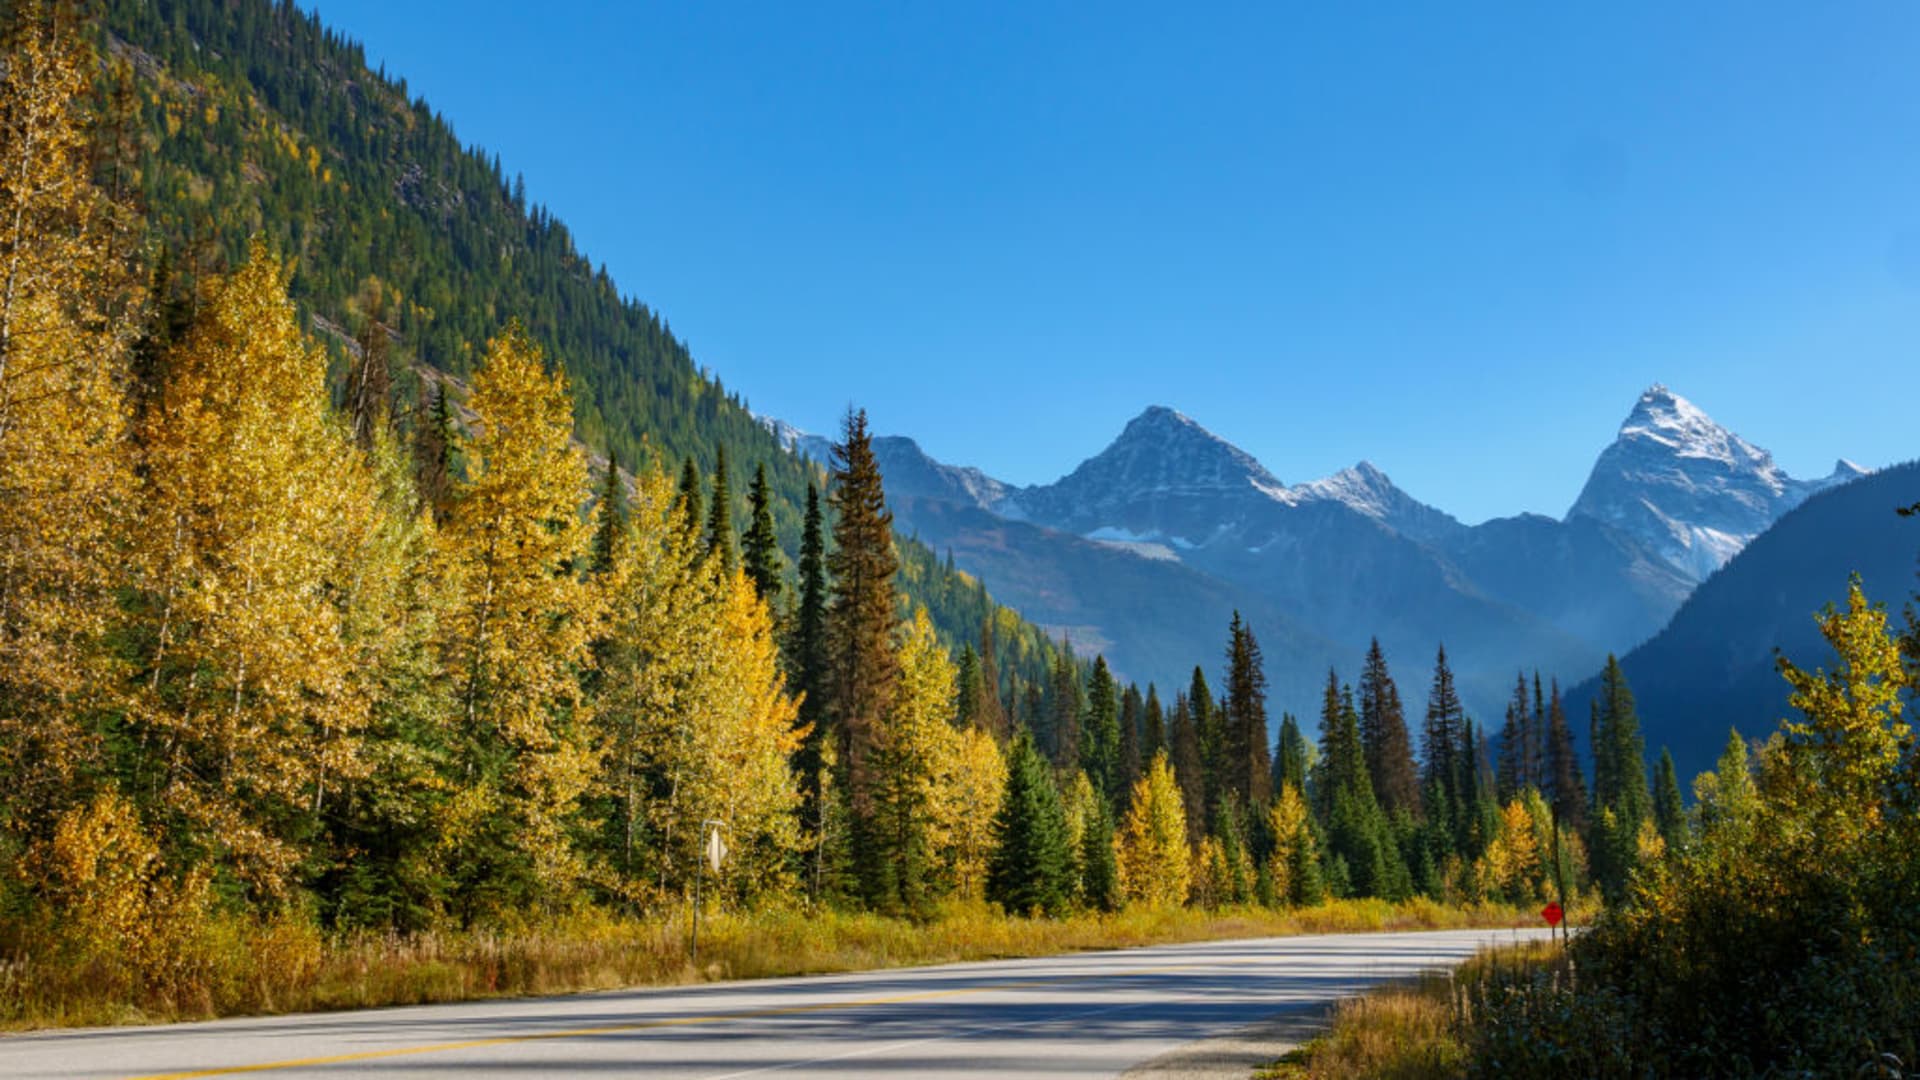 Fall colors along the Trans-Canada Highway near Golden in British Columbia, Canada.